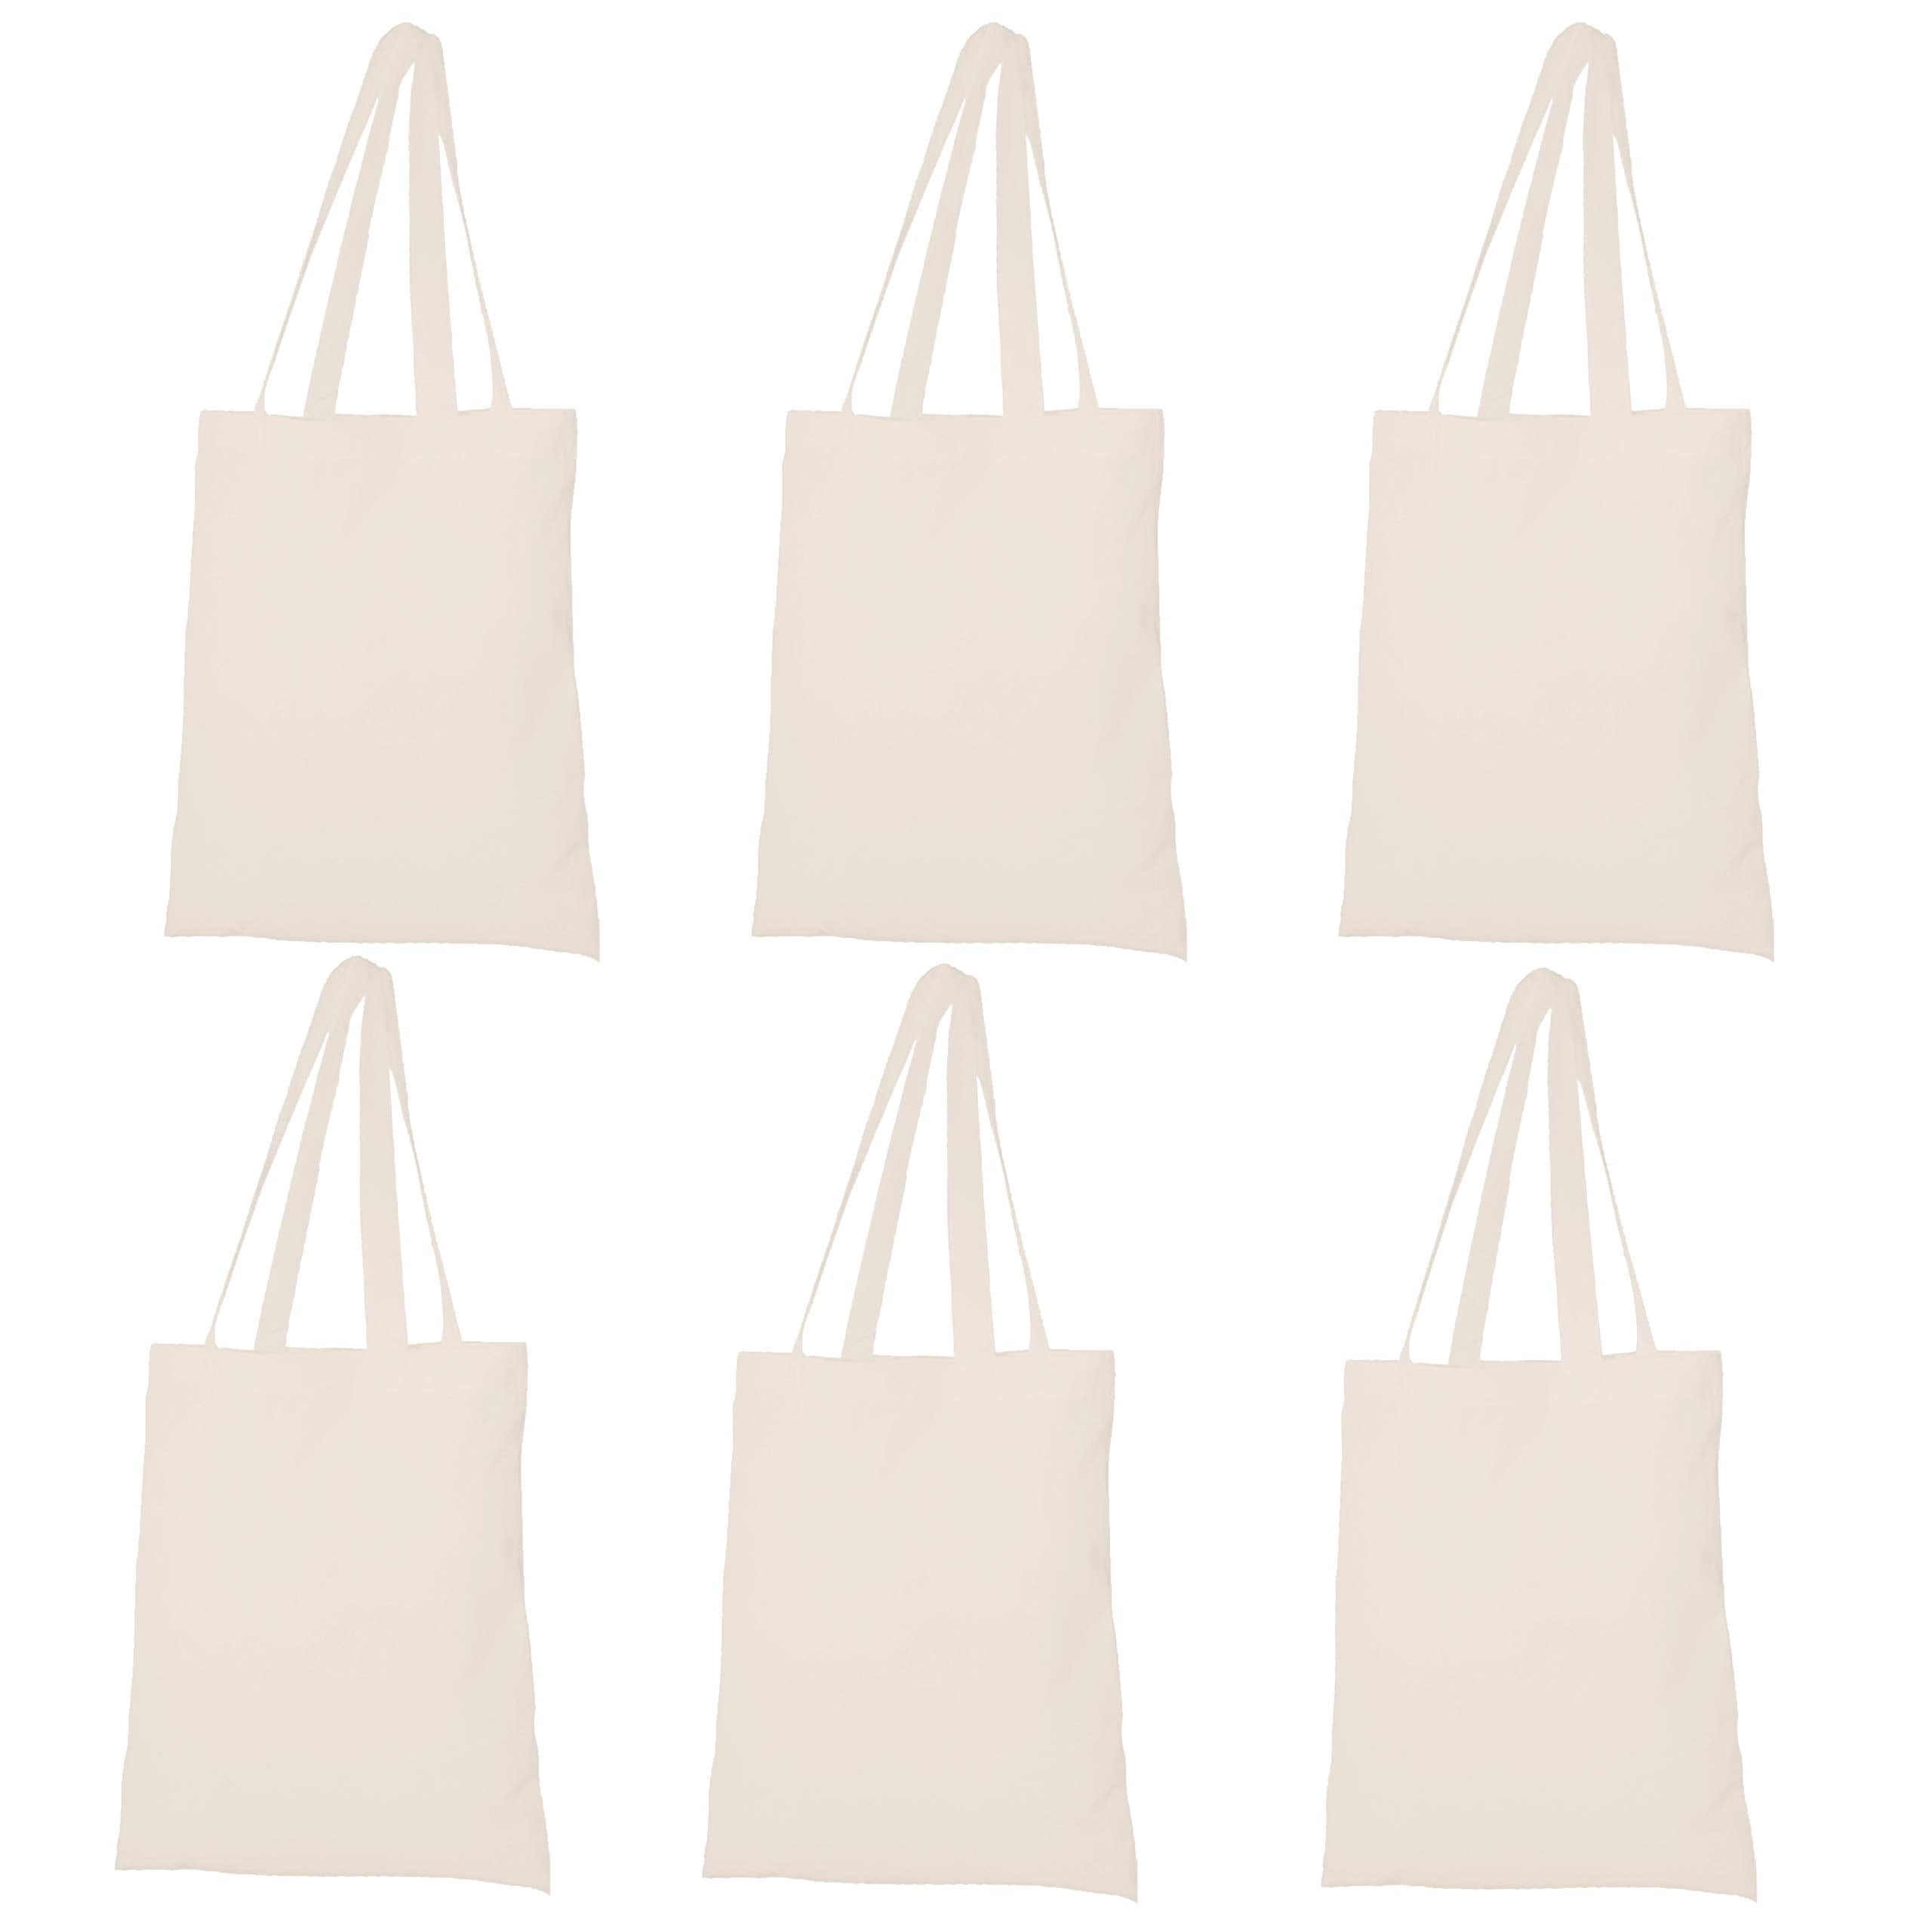 LITO Linen And Towel Canvas Grocery Bags| Canvas Shopping Bags With ...